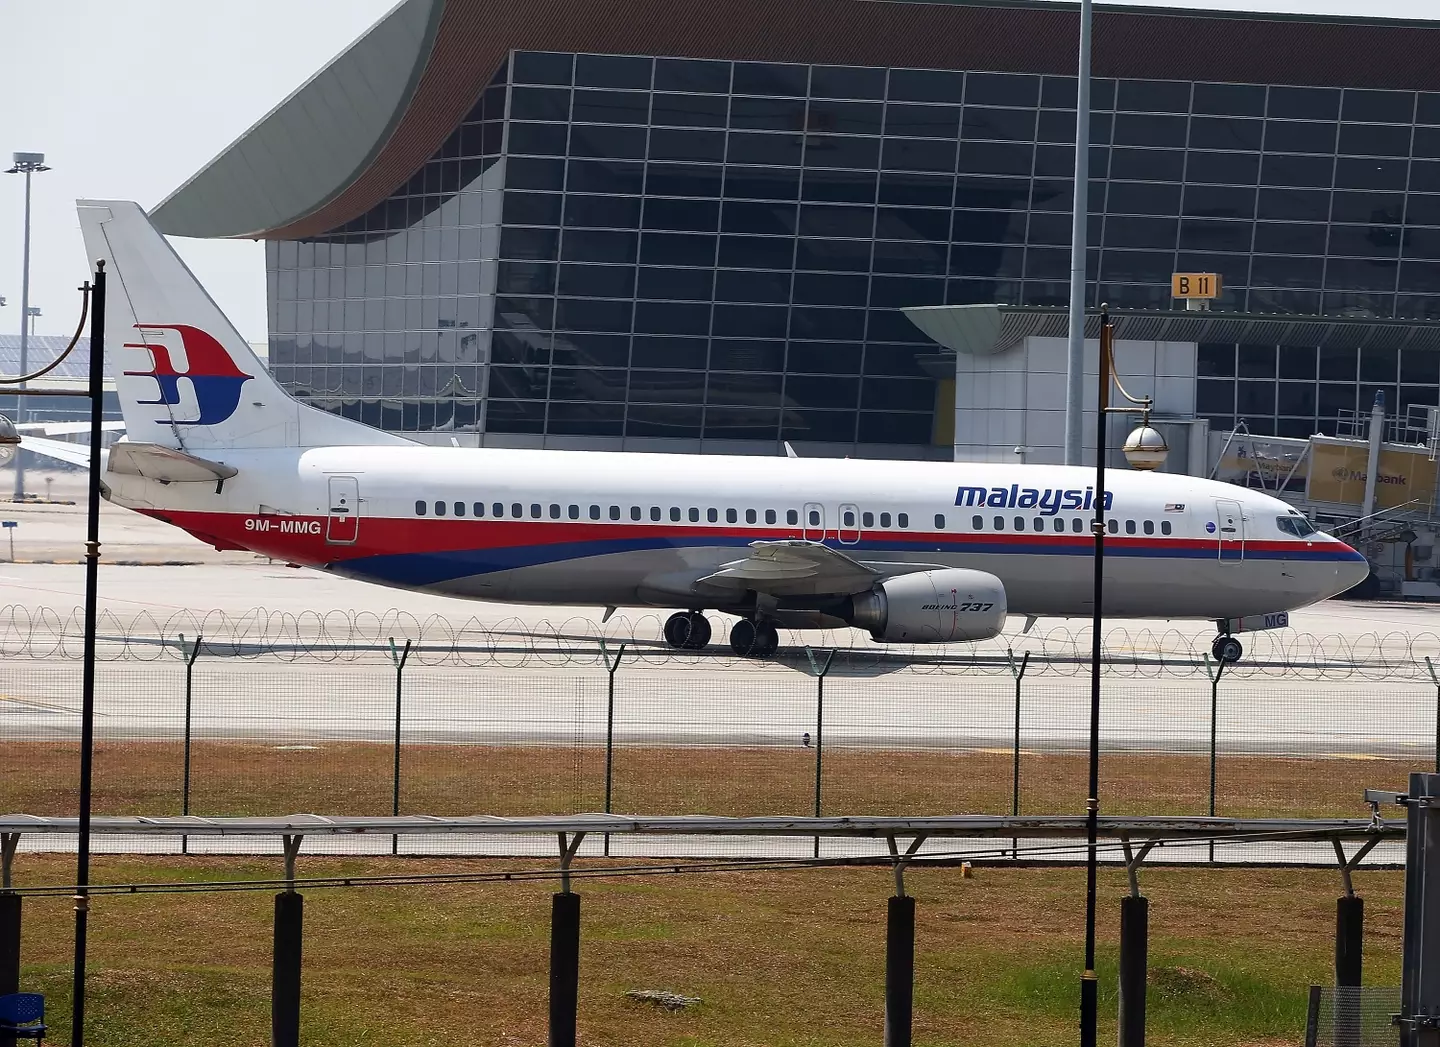 Malaysia Airlines flight MH370 disappeared in 2014.